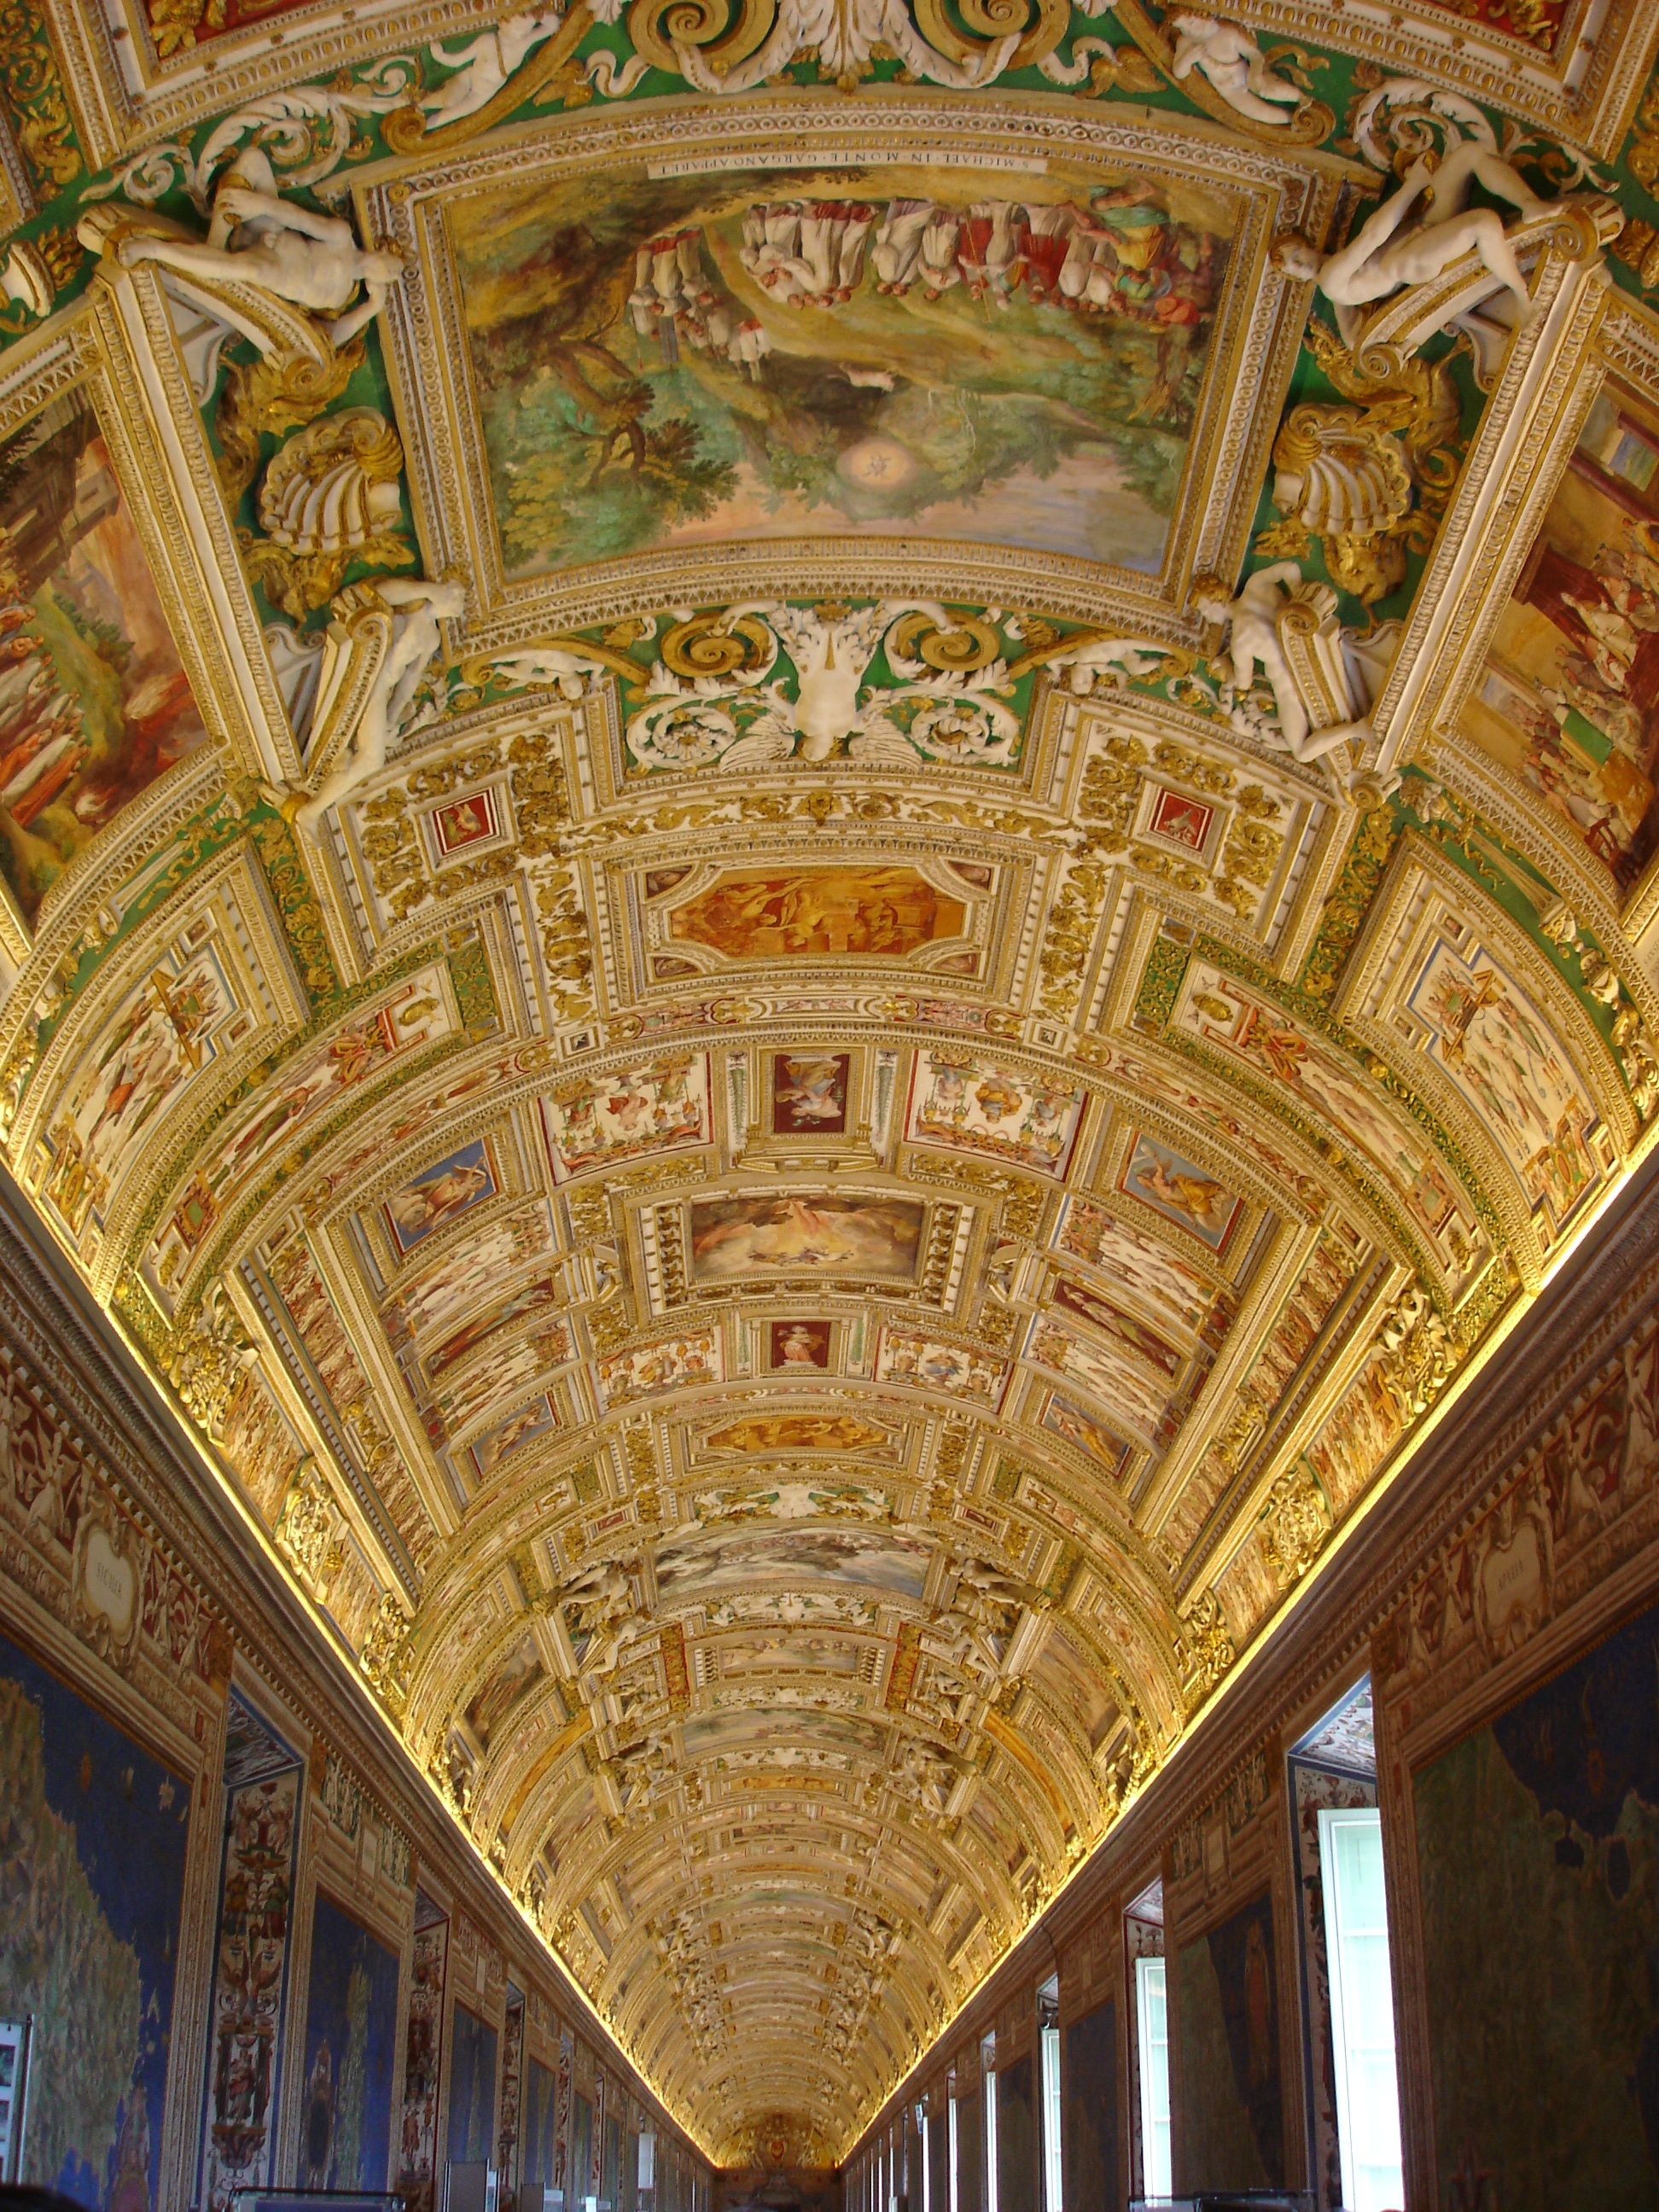 The ceiling of the map room in the <a href="http://mv.vatican.va/StartNew_EN.html">Vatican museum</a>, Rome